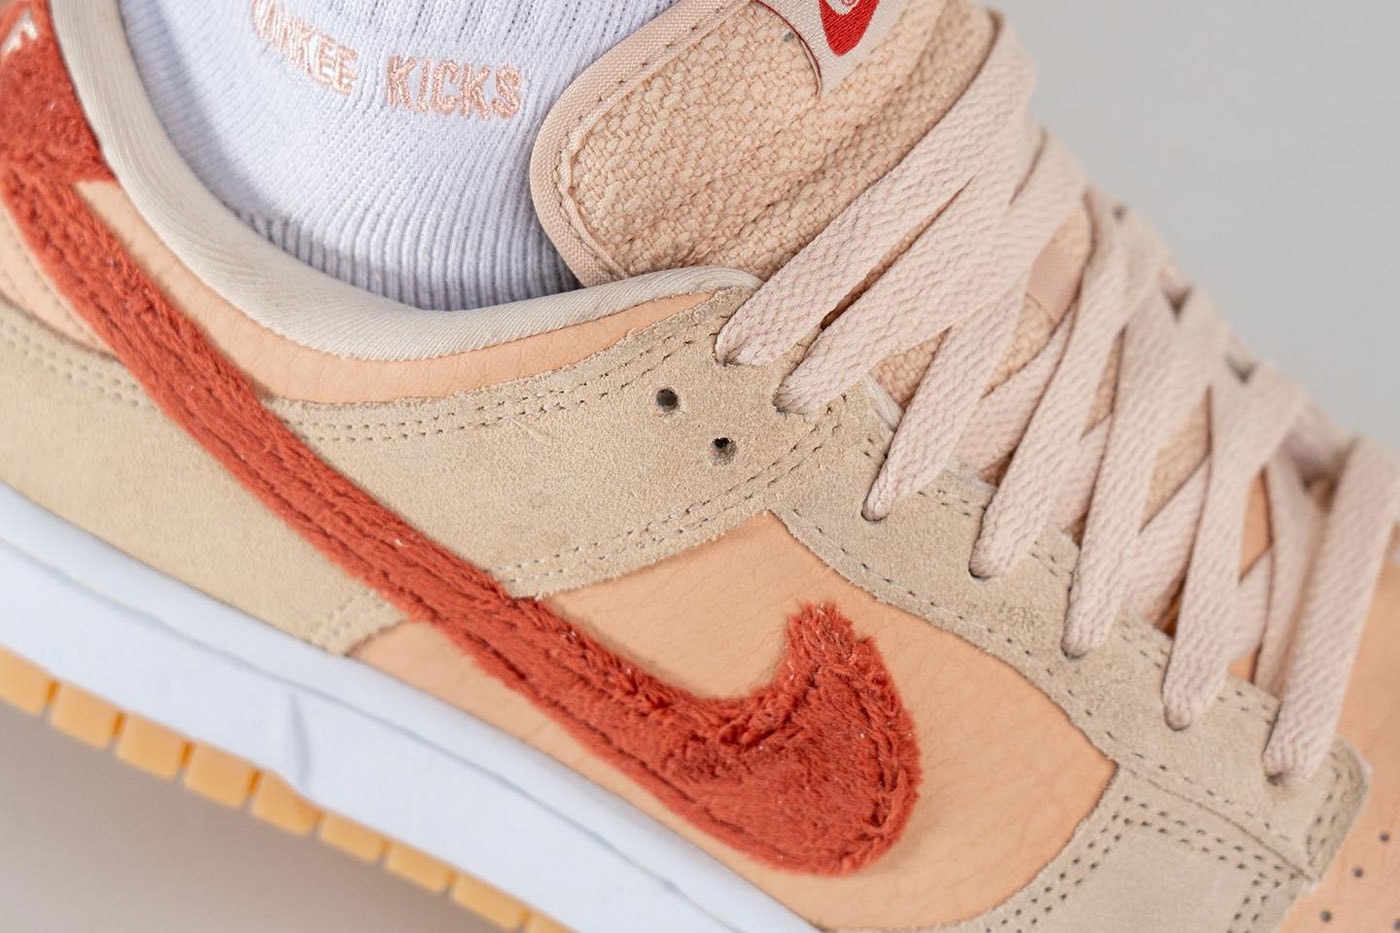 On-Feet Look at Nike Dunk Low "Carpet Swoosh" low top skate shoes swoosh textured fuzzy